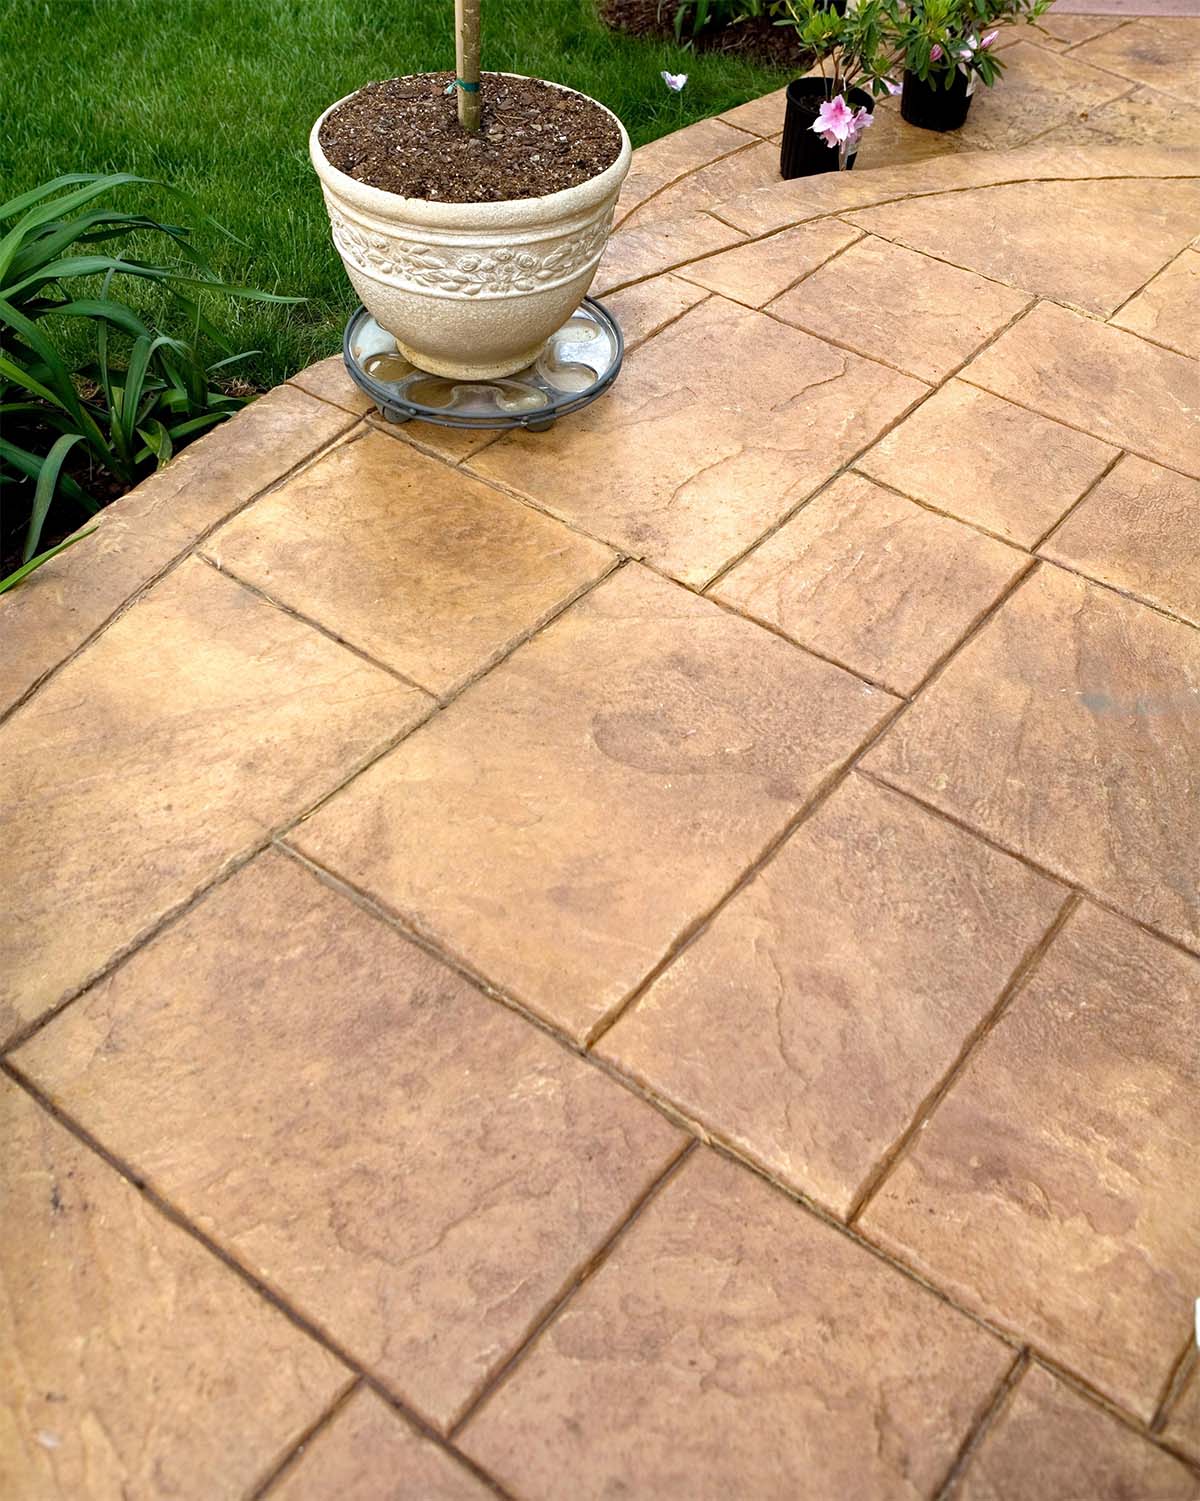 New Stamped Concrete Patio Installed In Residential Home In Toowoomba QLD